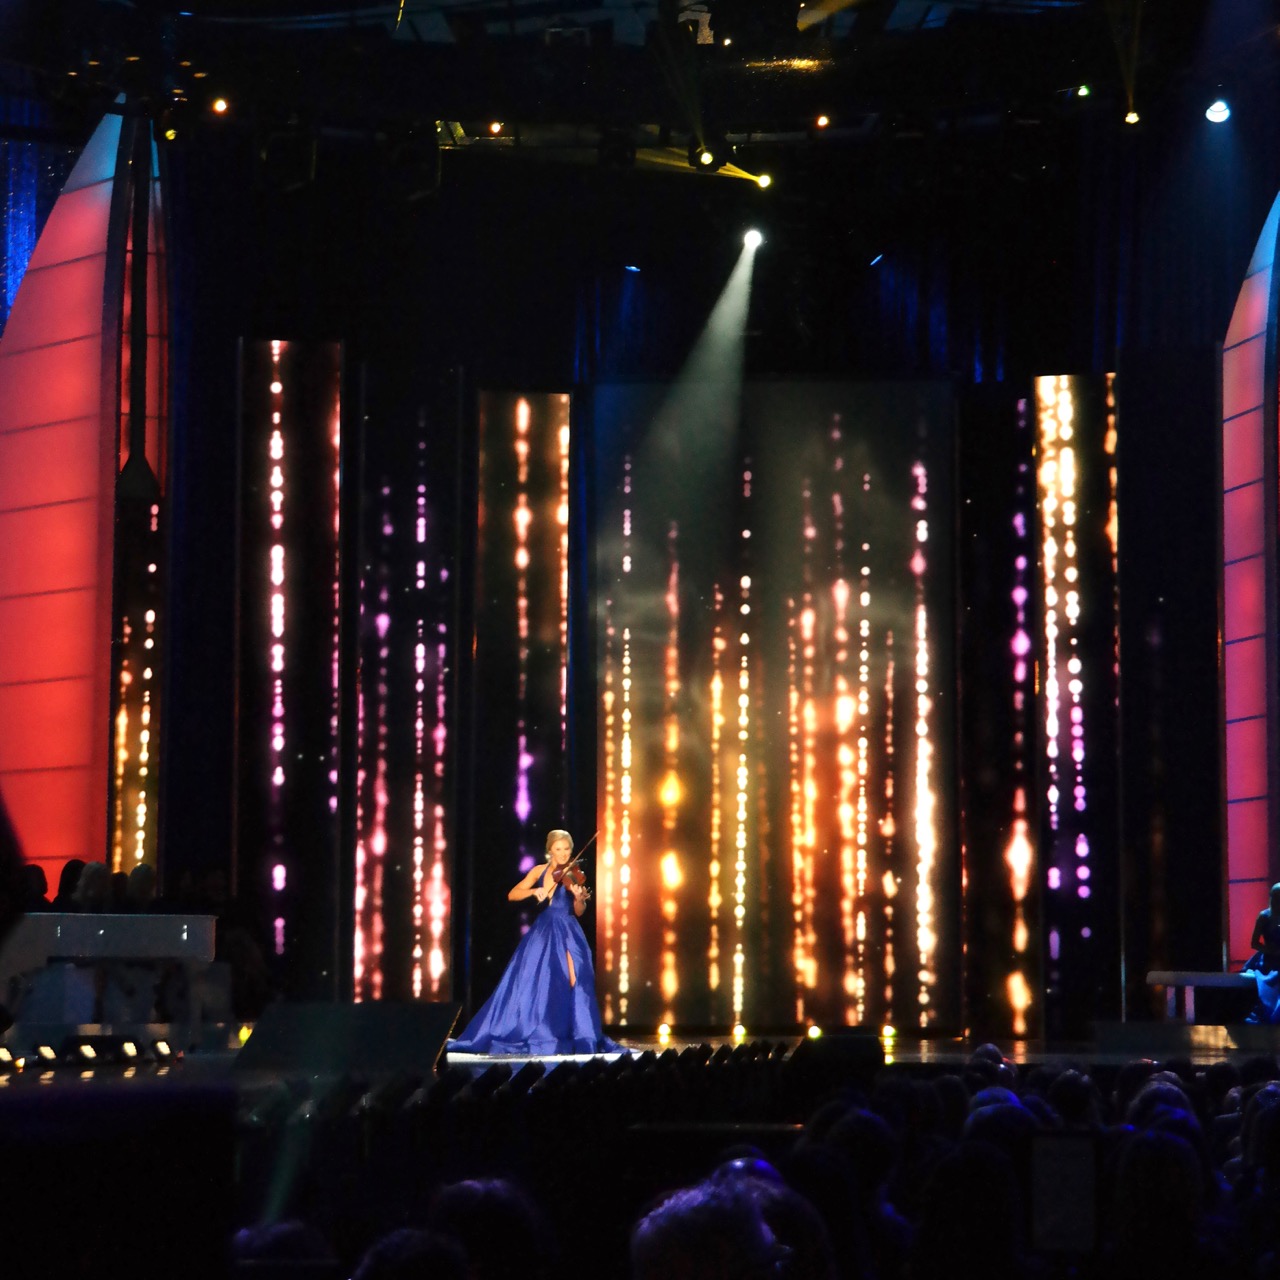 The 2016 Miss America Competition - Screens Design